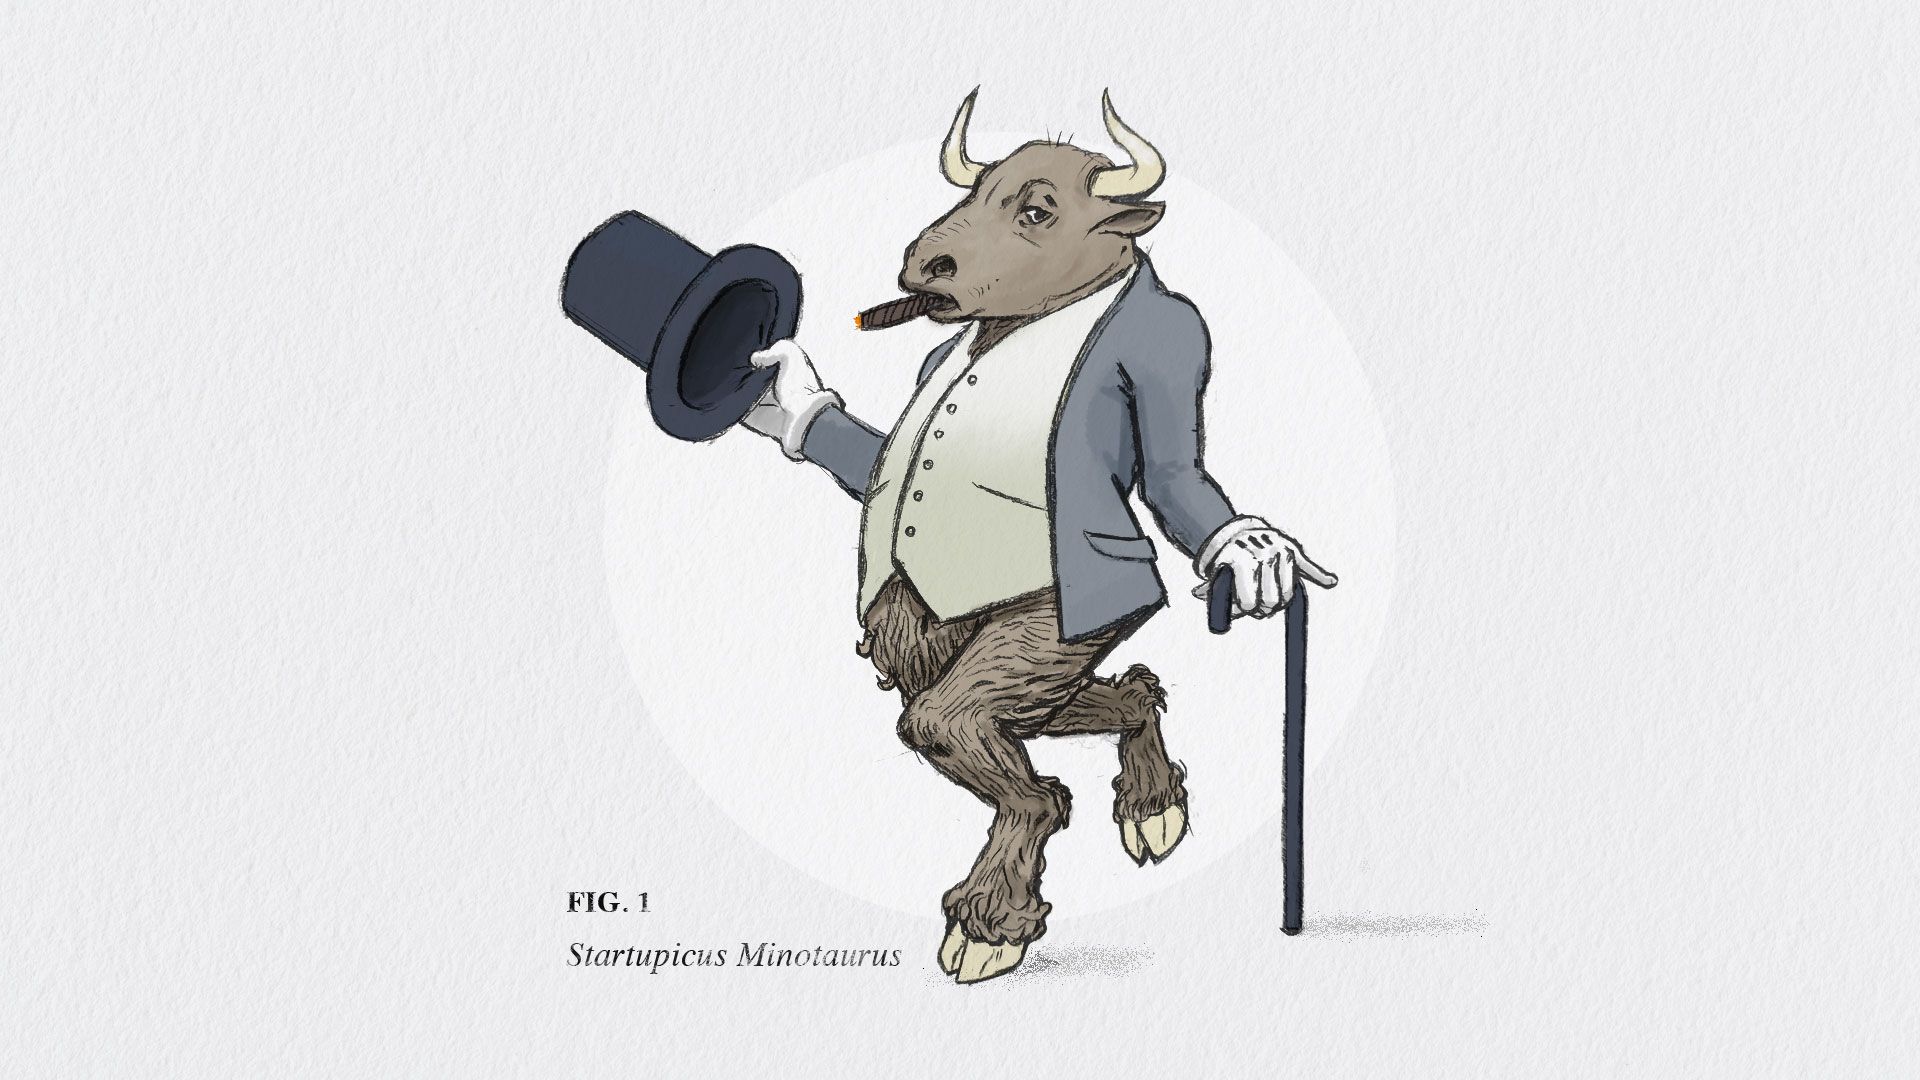 A fancy minotaur with a cane and top hat